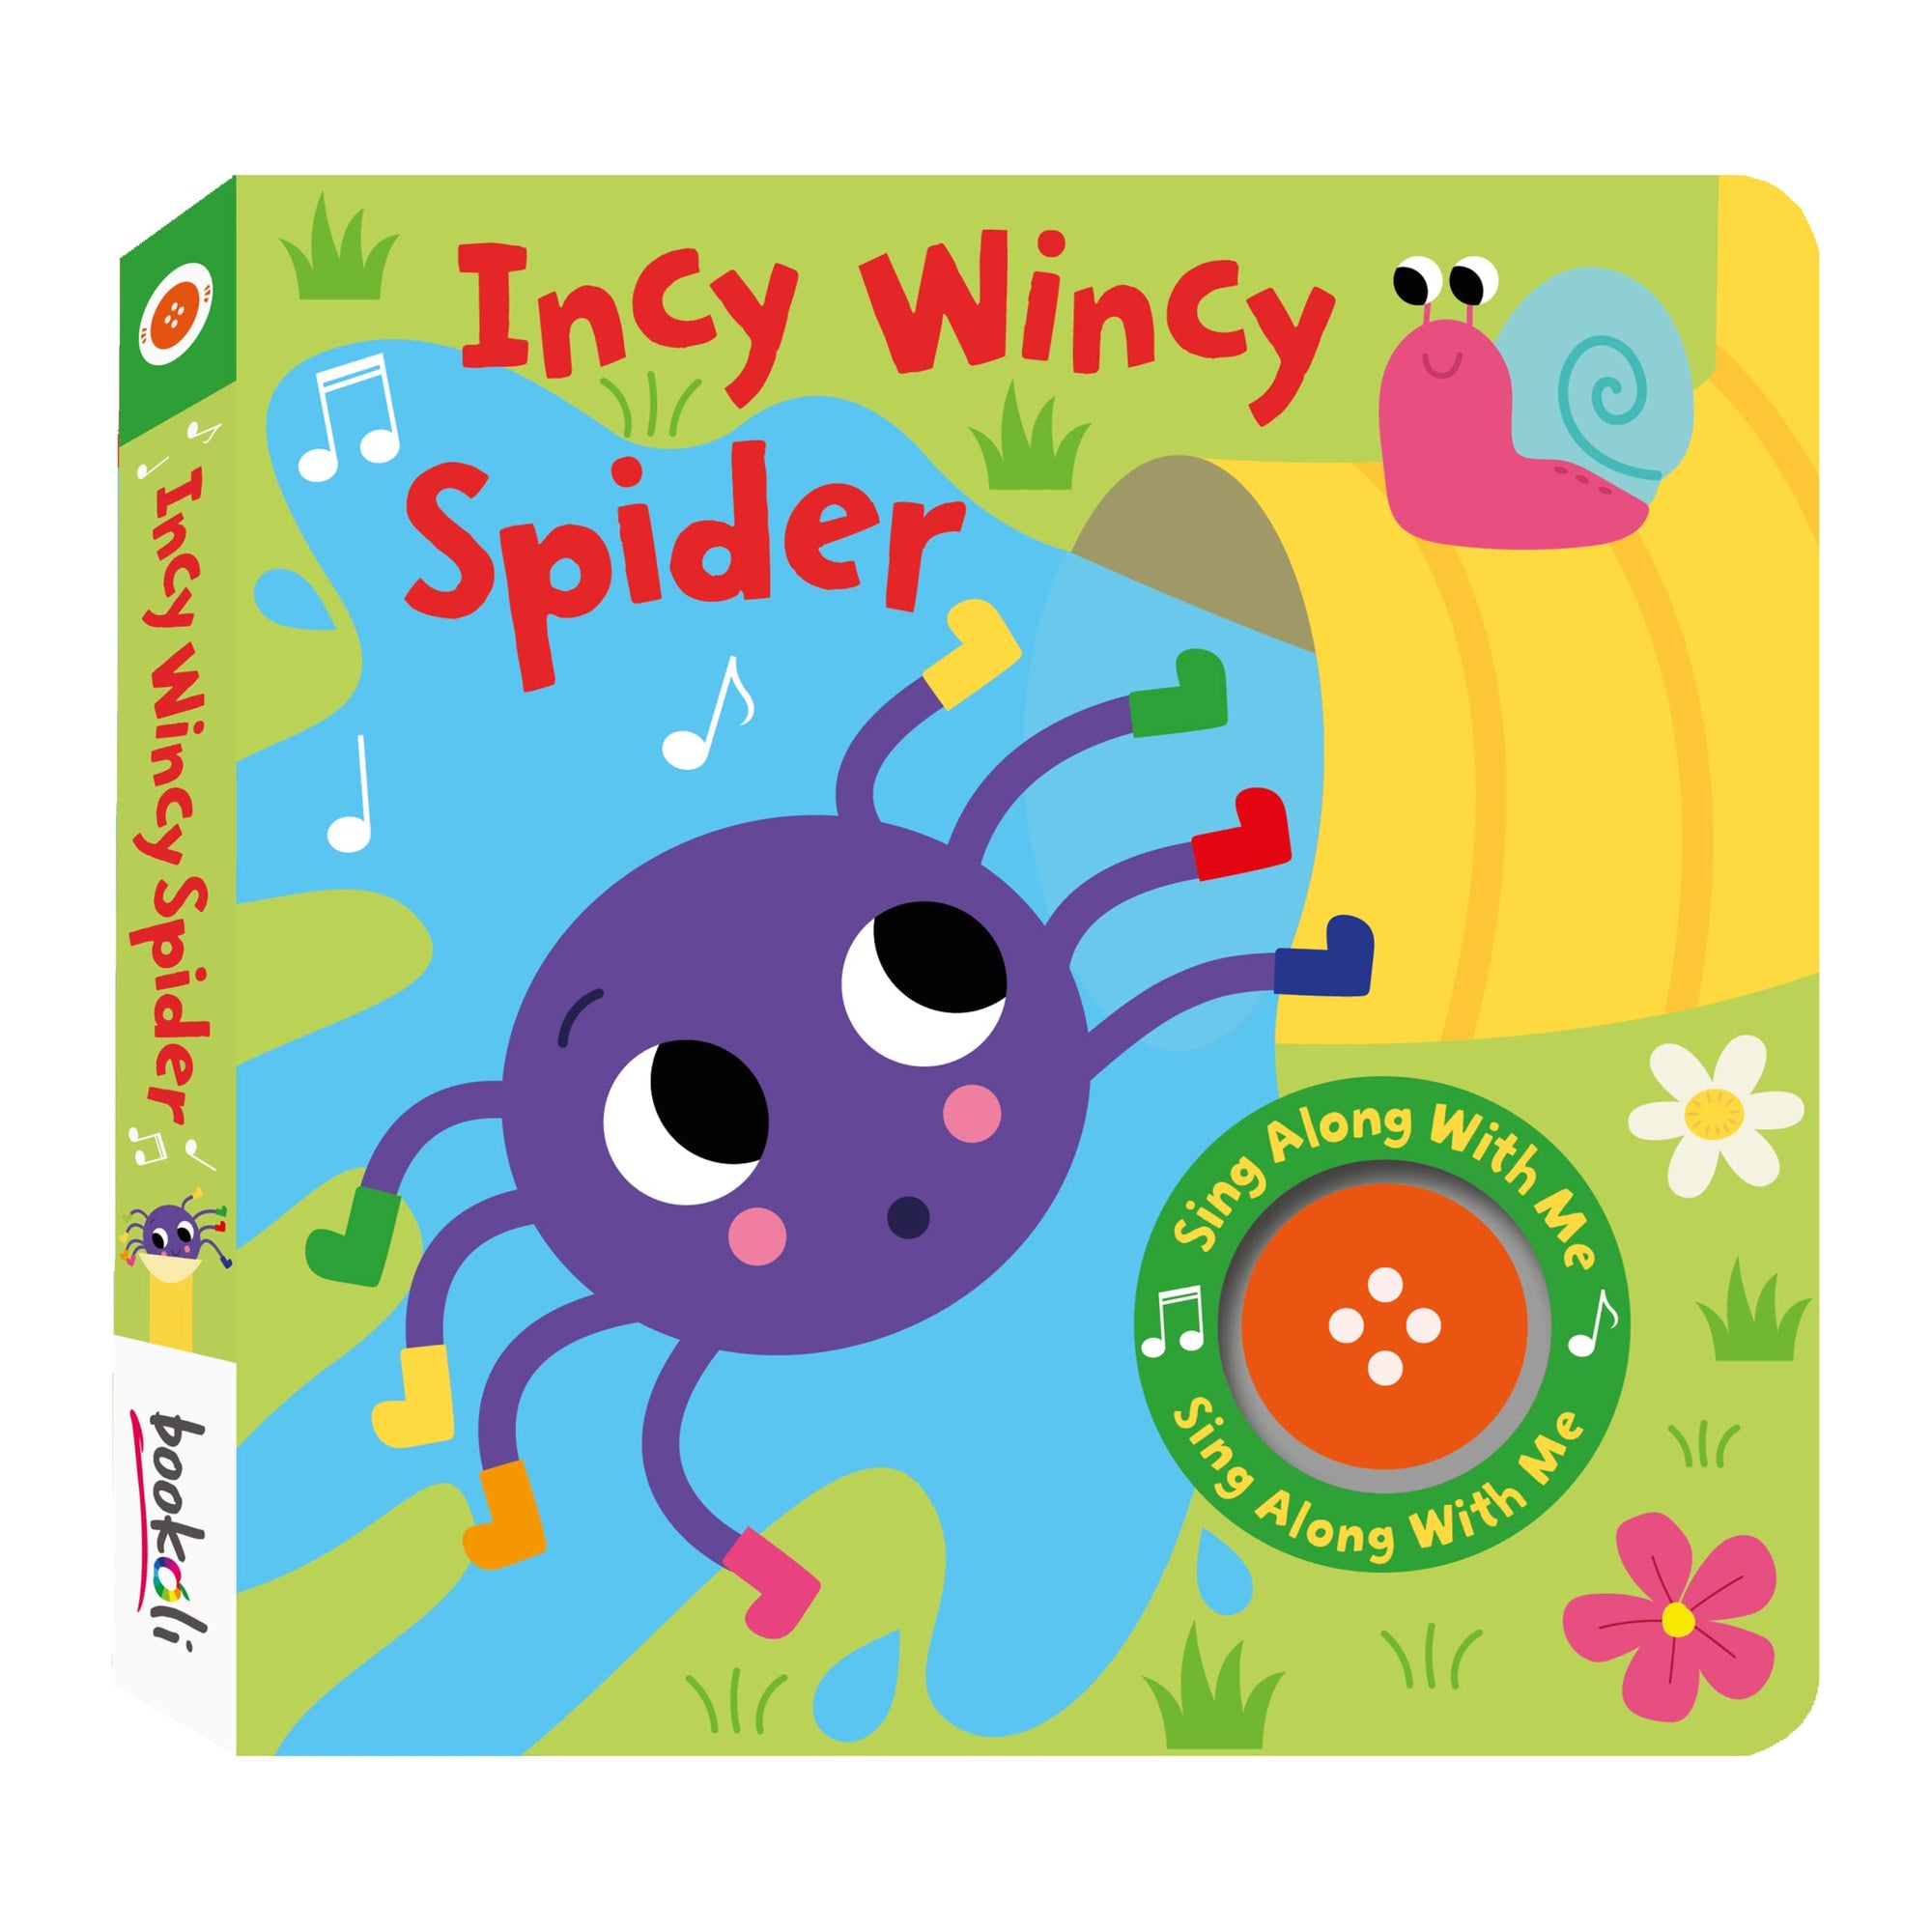 Sing Along With Me Sound: Incy Wincy Spider